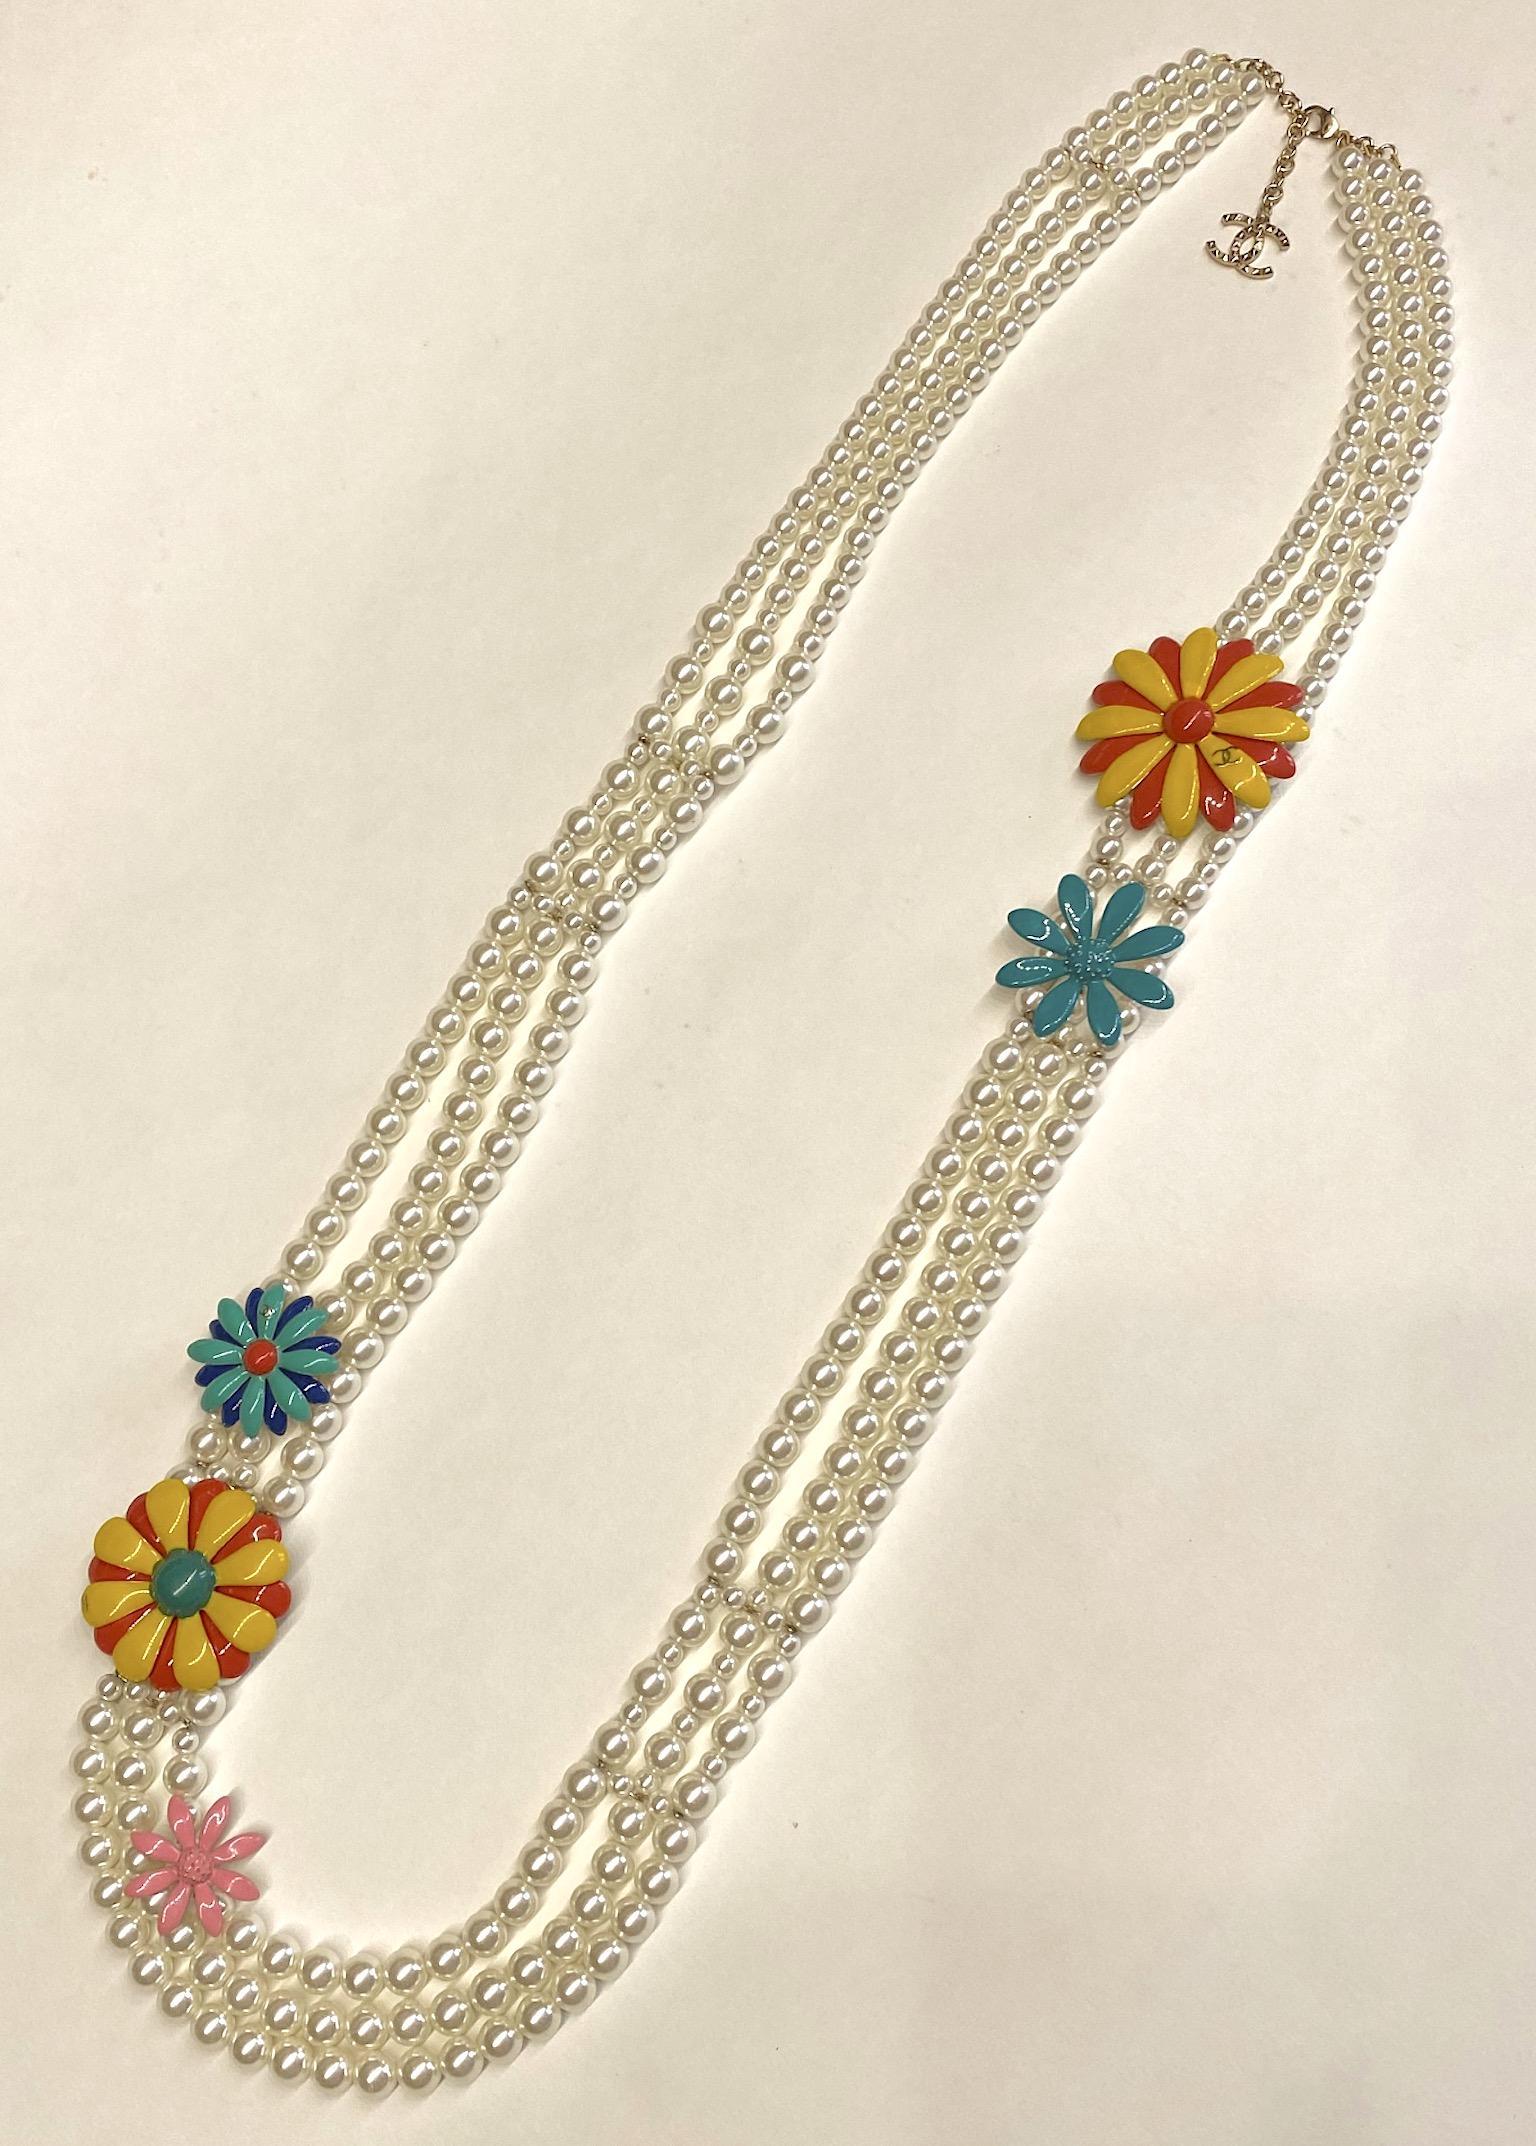 A truly impressive Chanel necklace from the 2016 spring (Printemps) collection. The necklace is comprised of three strands of faux pearls with glass centers in 6.2, 8 and 10 mm sizes. The three strands are connected together at seven points with